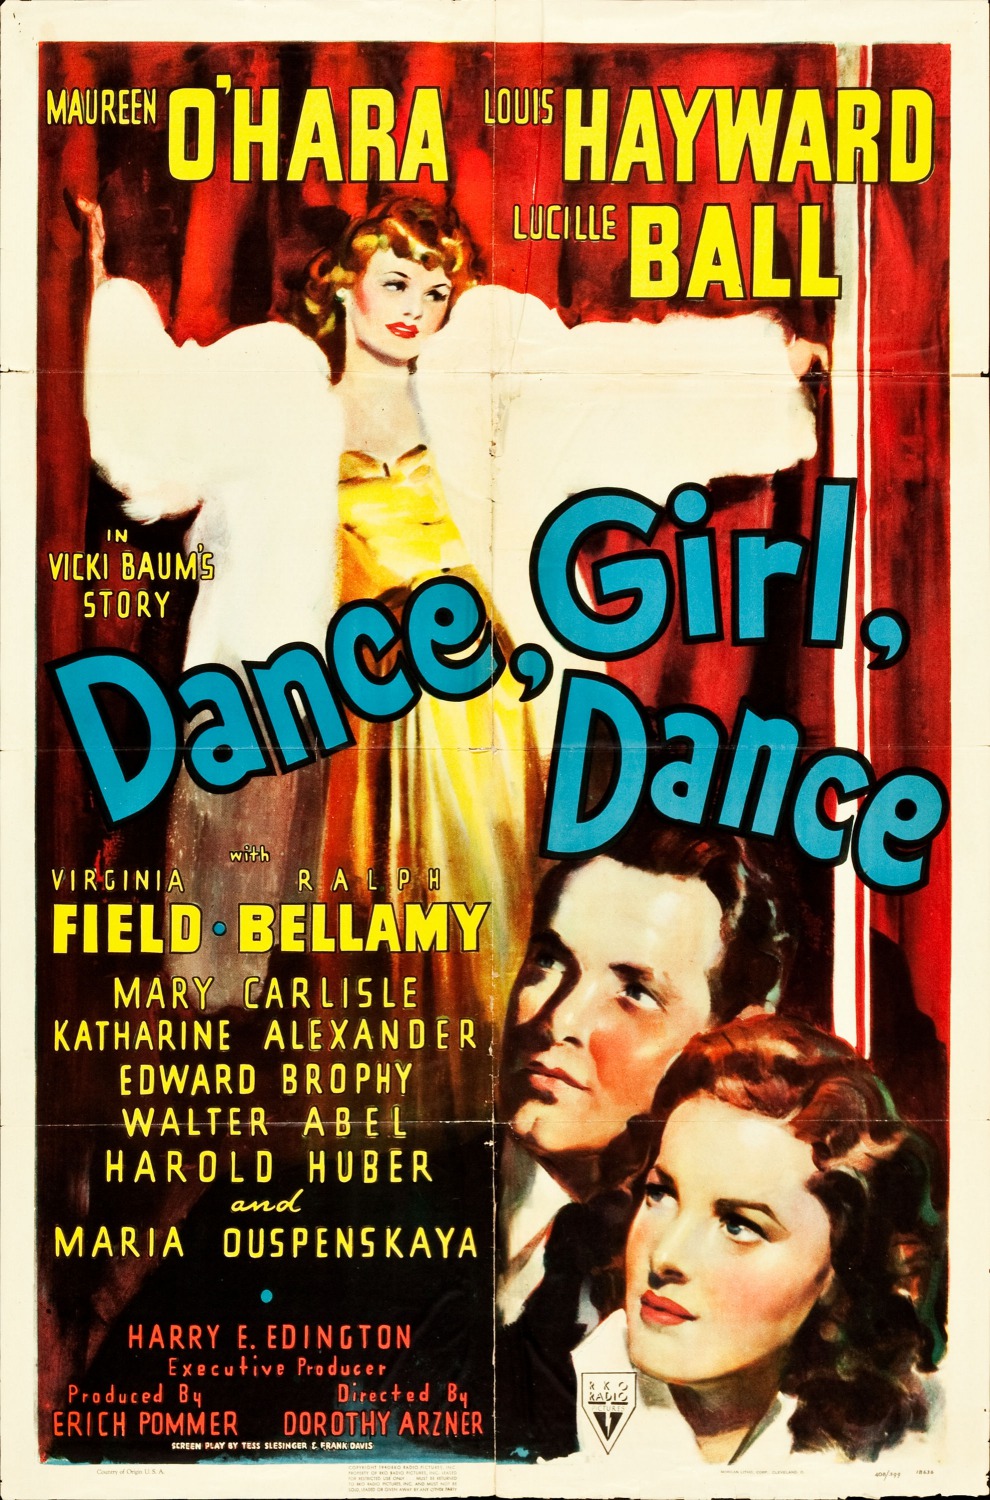 Extra Large Movie Poster Image for Dance, Girl, Dance 